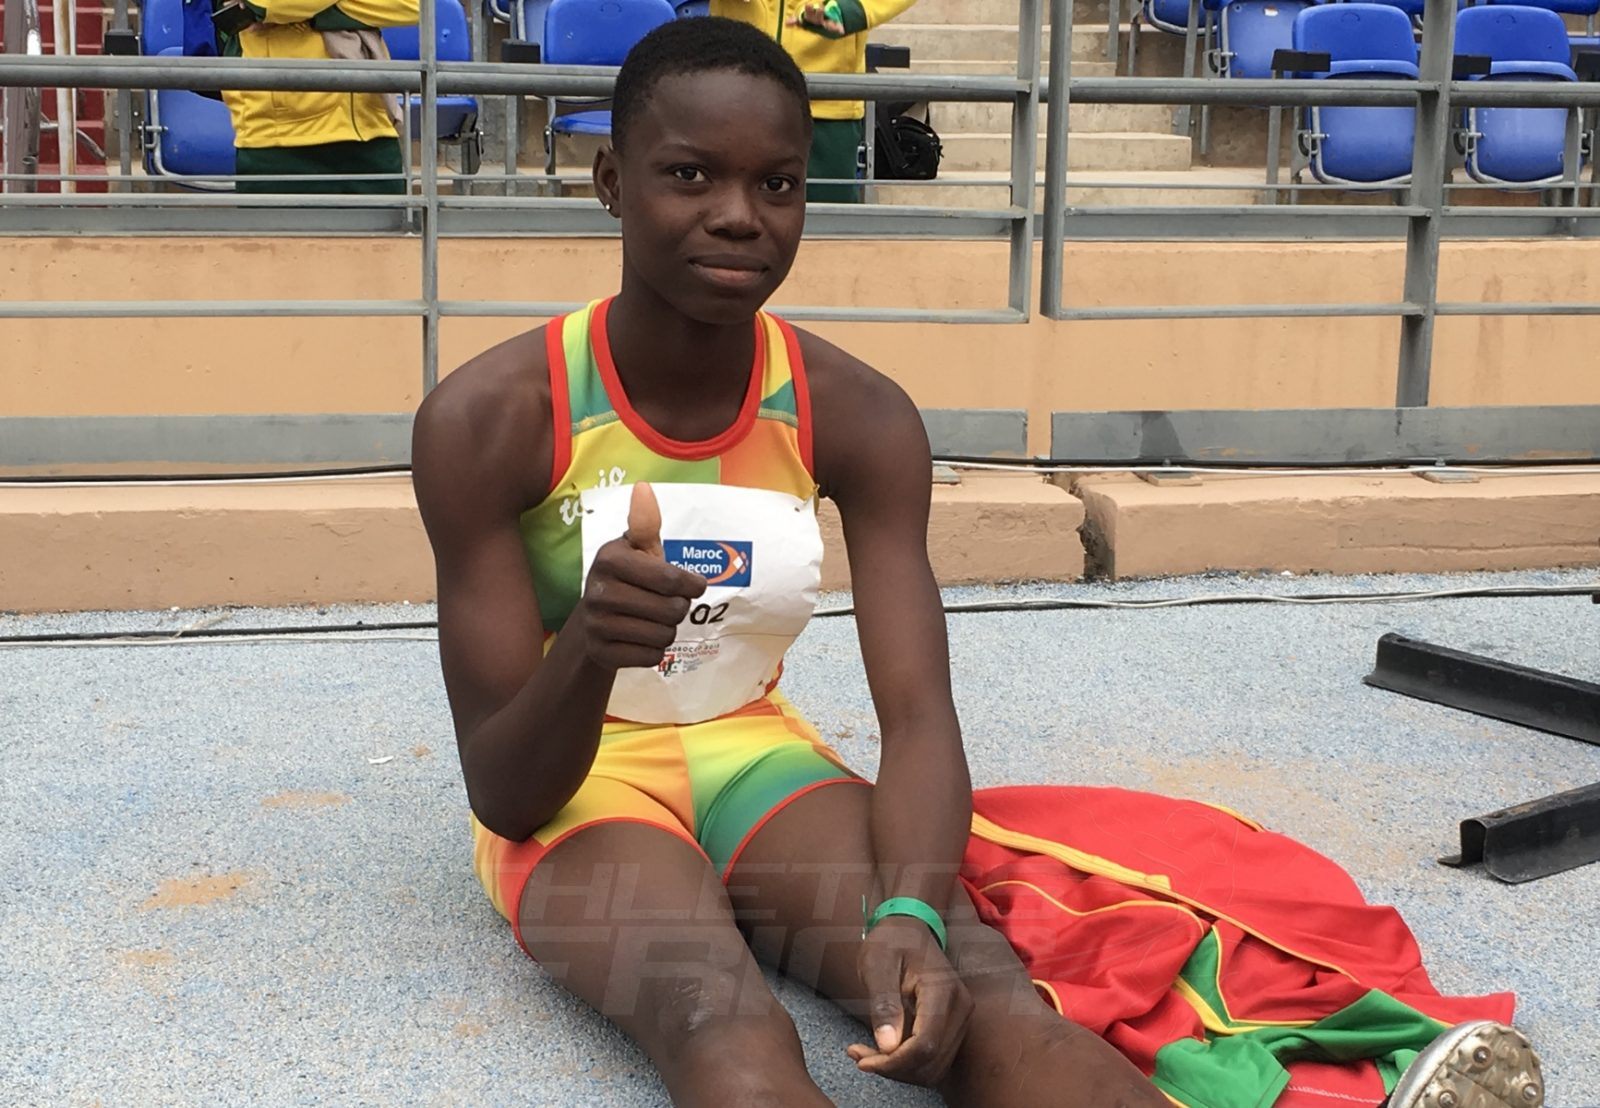 Nemata Nikiema of Burkina Faso finished in 10th place, with 9.97m, in the Girls Triple Jump Final at Gymnasiade 2018 in Marrakech / Photo Credit: Yomi Omogbeja